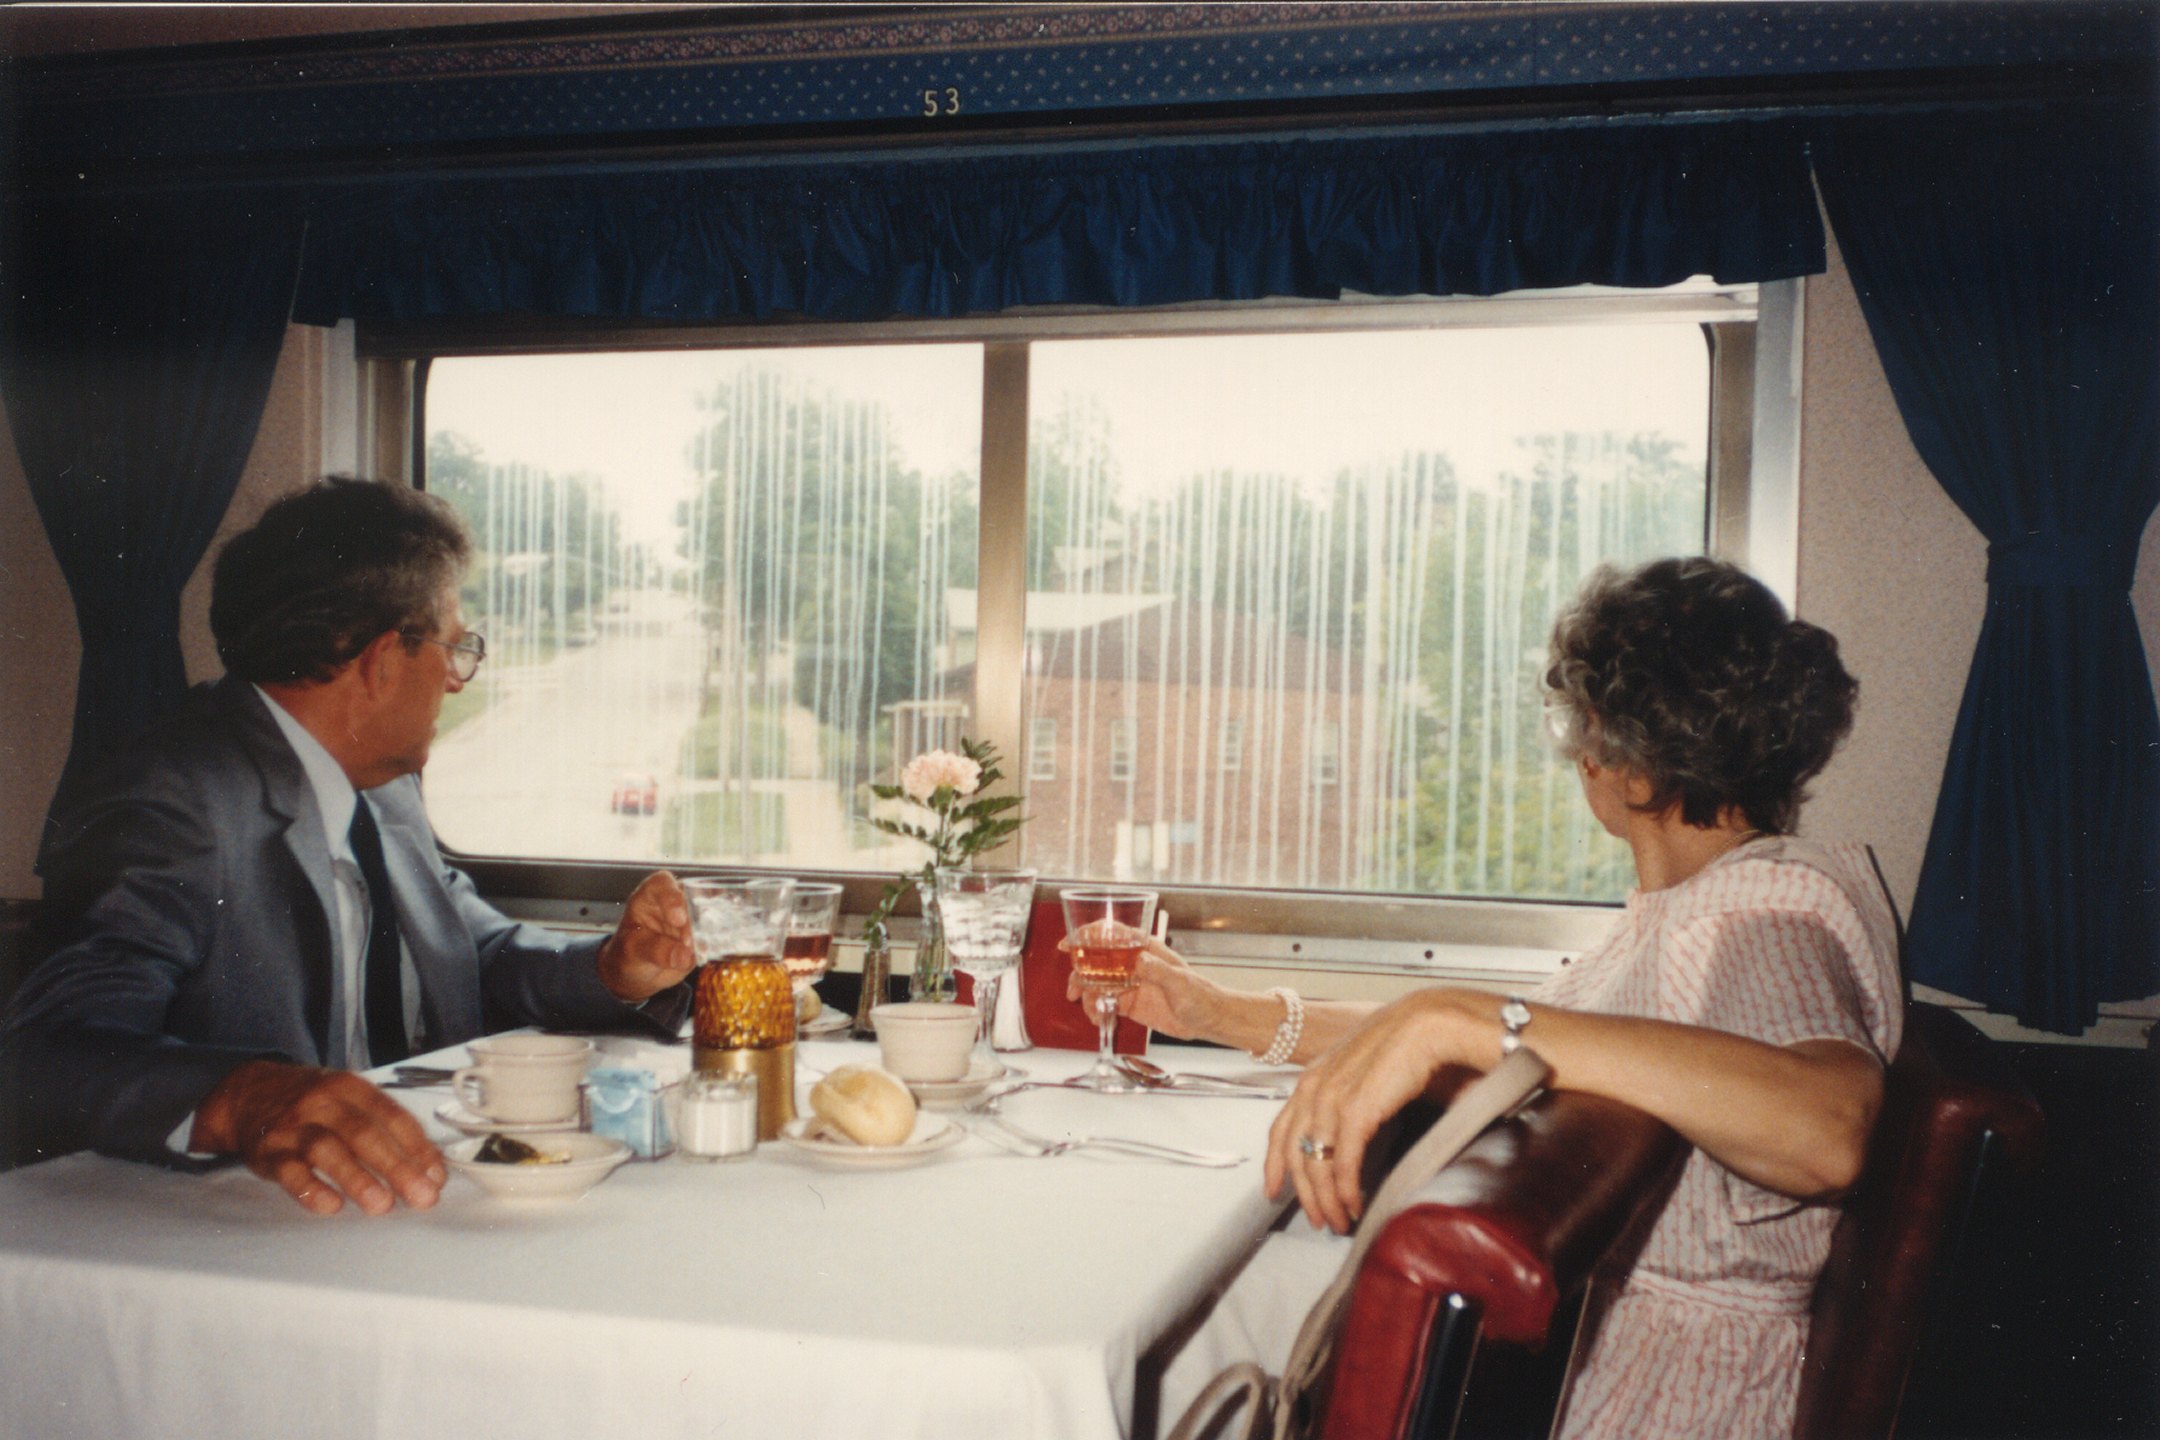 On board the QCR, showing the car interior and dining setup.  Those would be my maternal grandparents, Harold and Jane Bryant